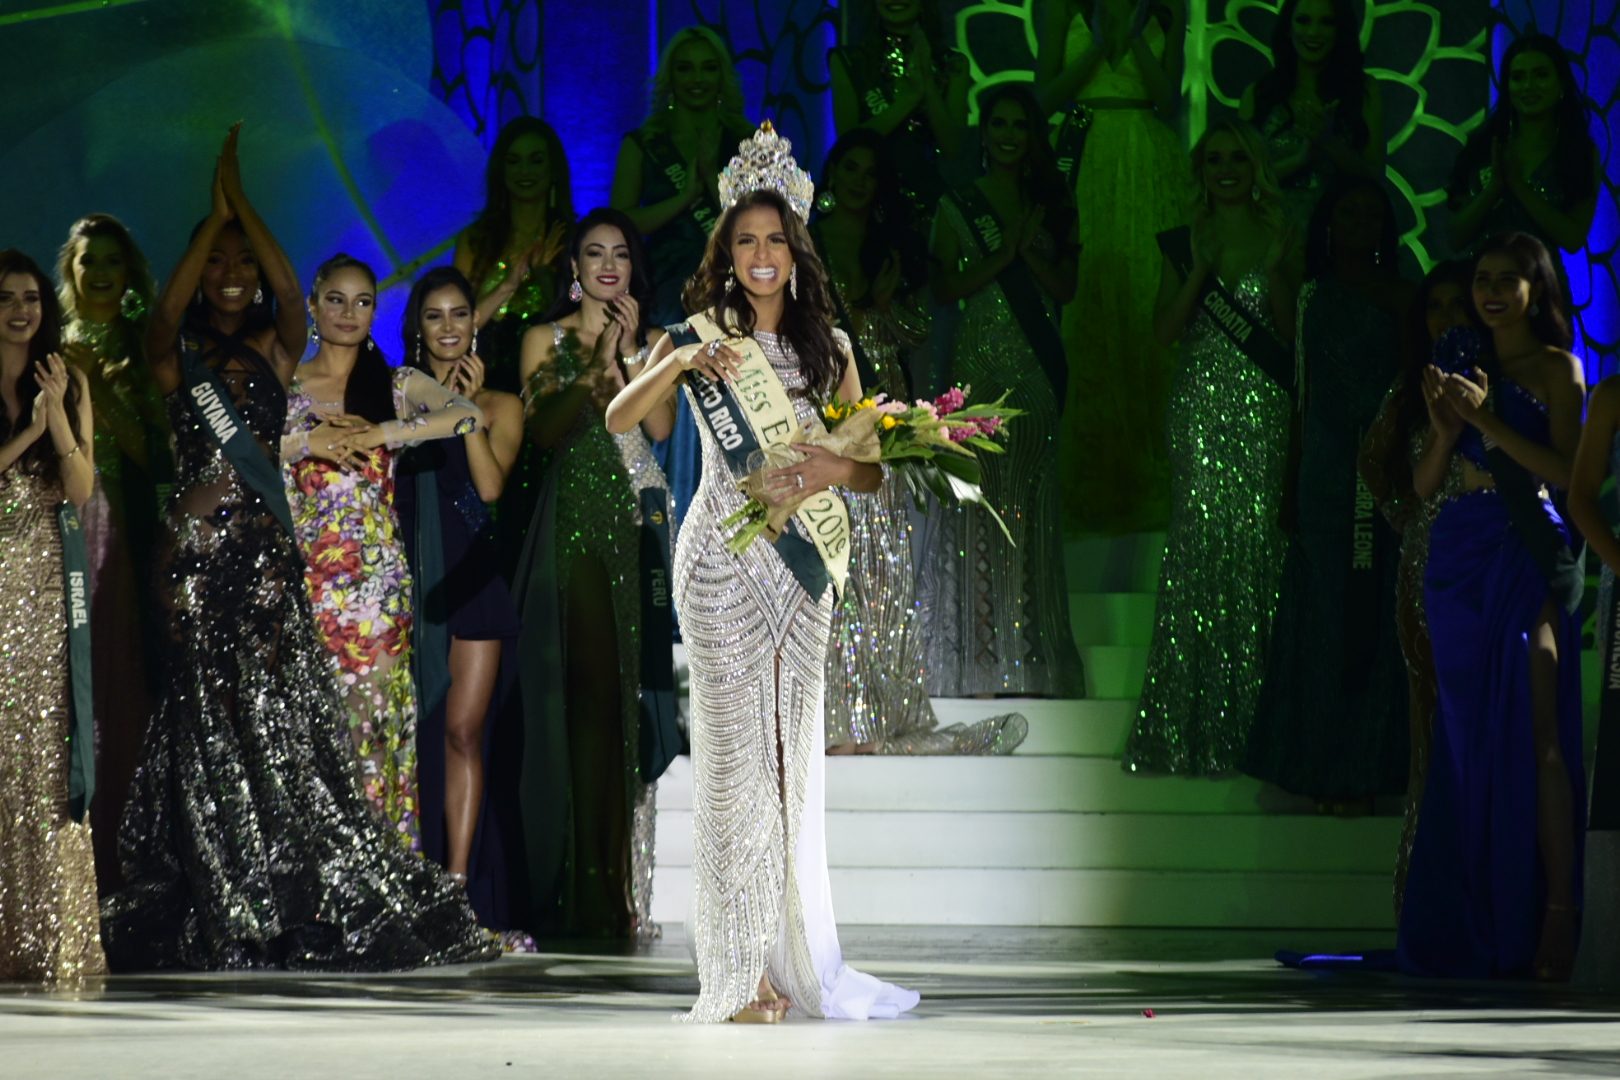 IN PHOTOS: Nellys Pimentel’s Miss Earth 2019 journey